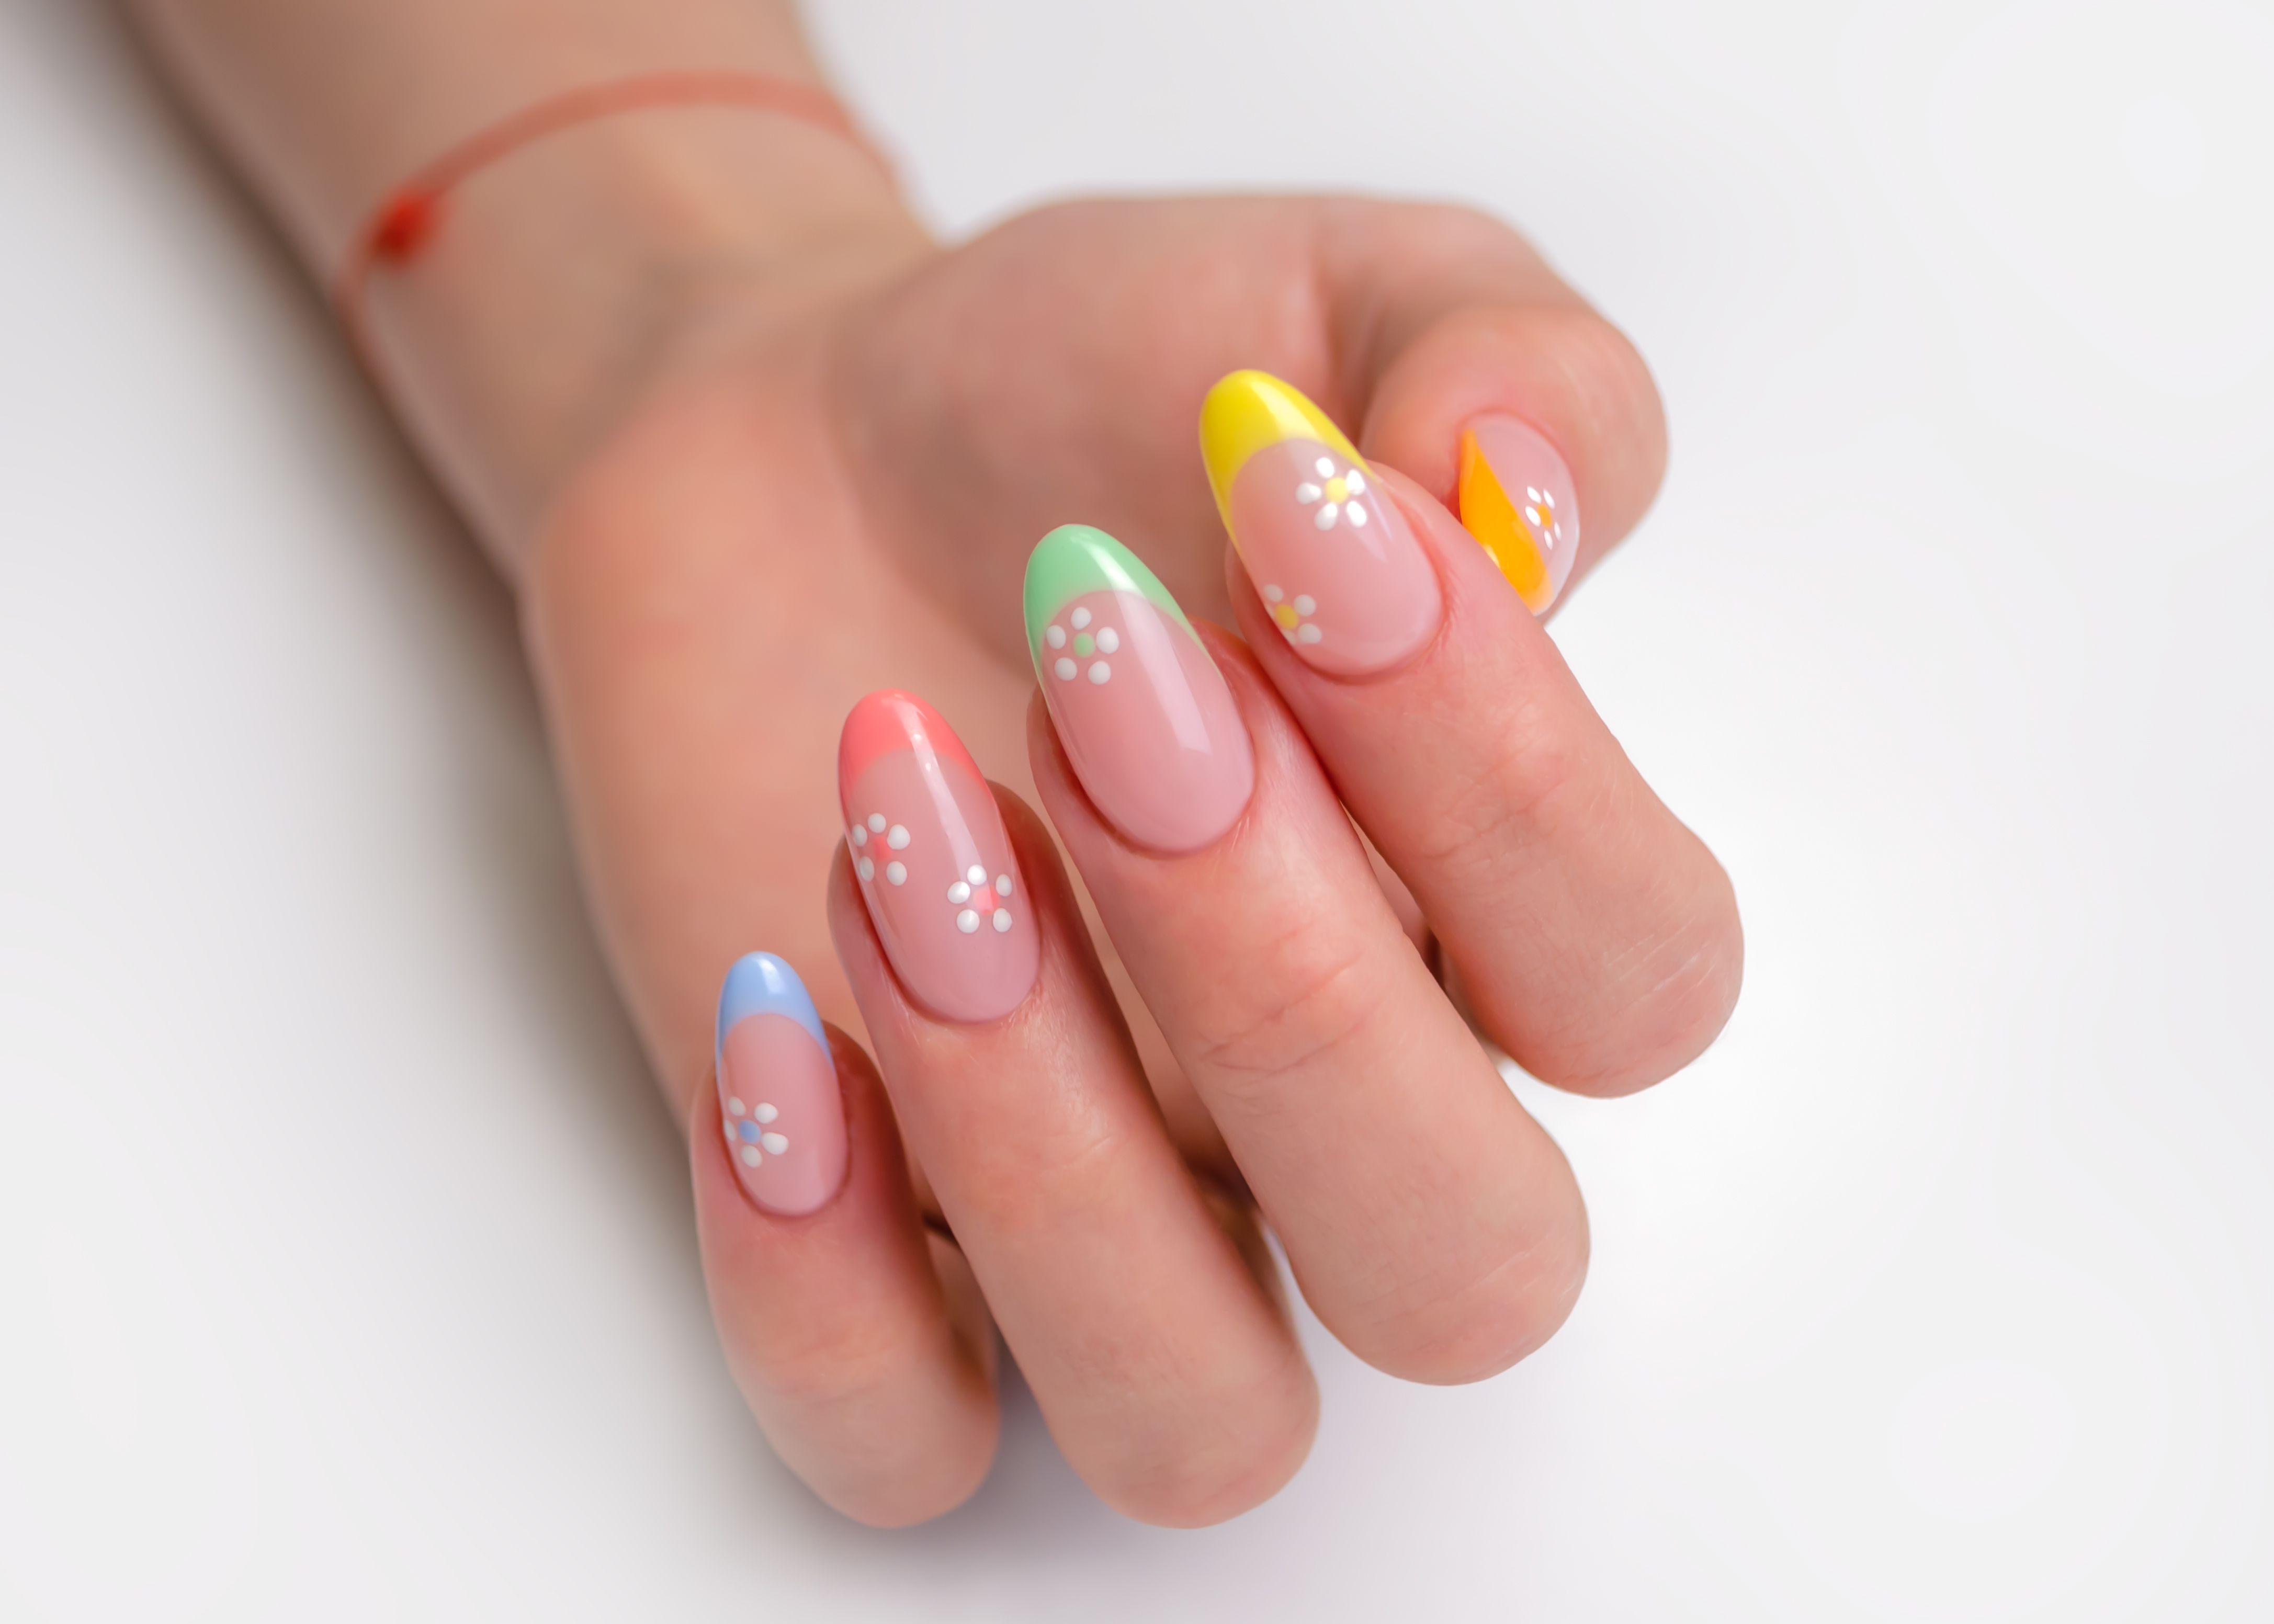 Colorful pastel nails with flower details. | Source: Getty Images